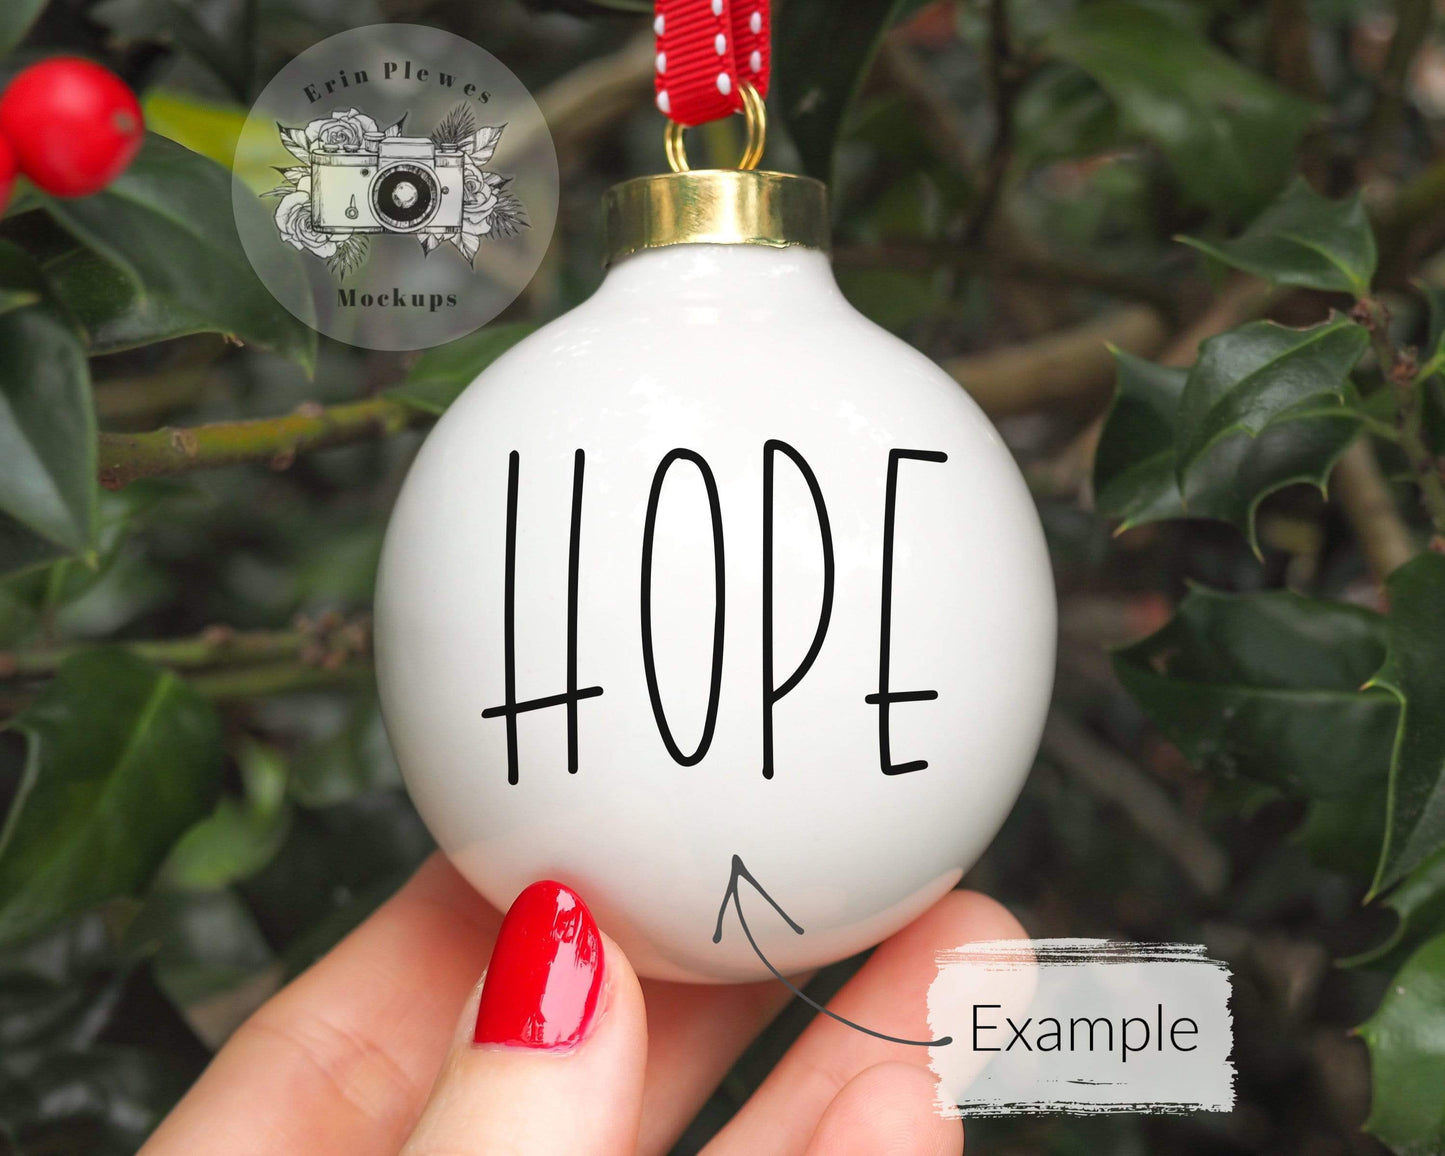 Erin Plewes Mockups Ornament mockup, Christmas ball ornament mock up for styled stock photography, JPG Instant Digital Download Template